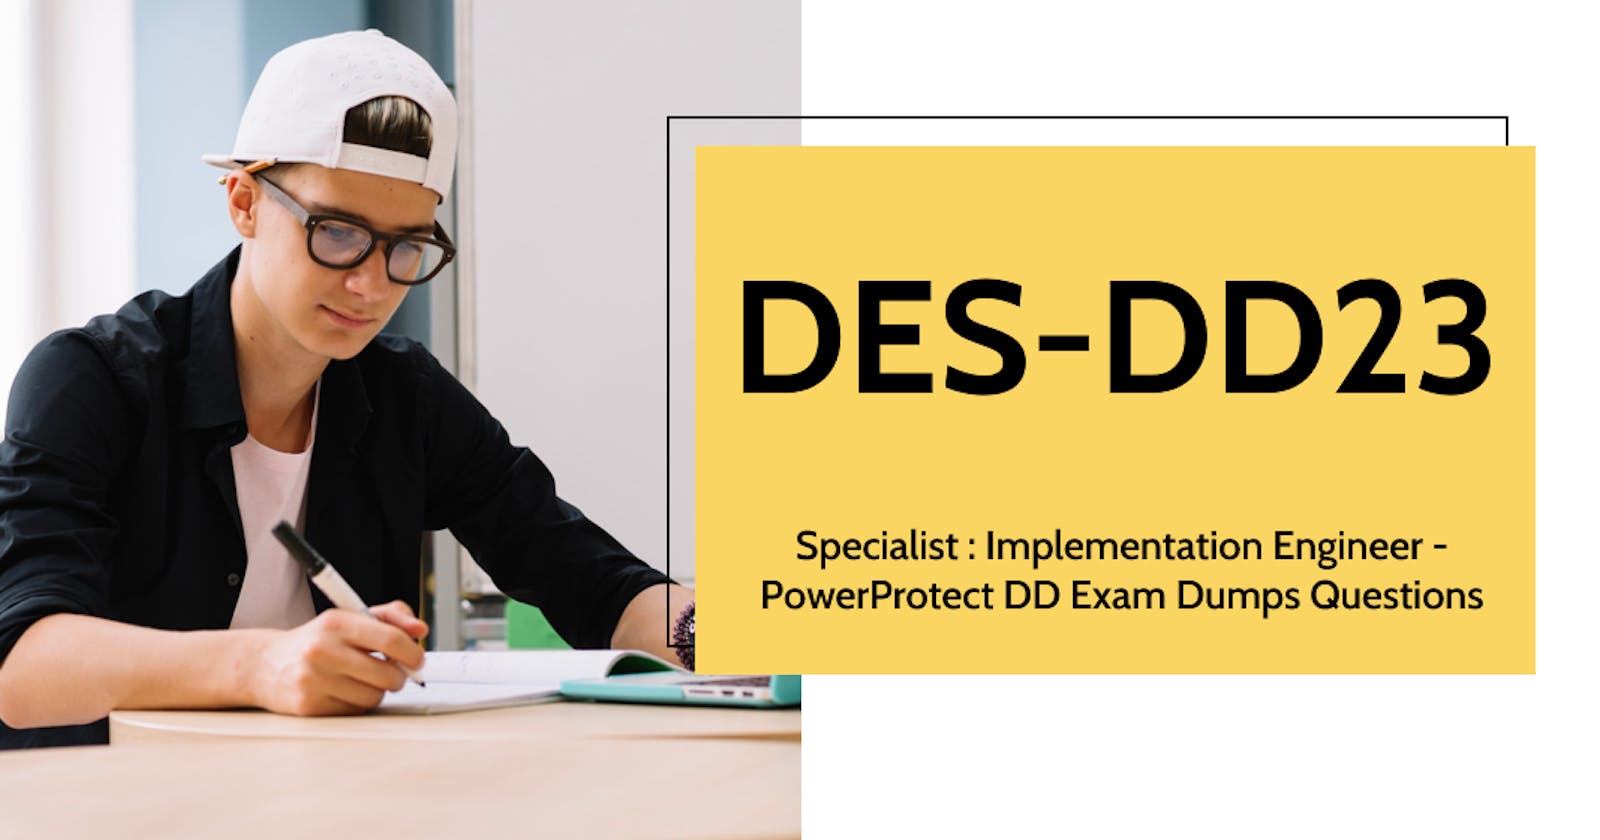 How DES-DD23 Exam Dumps Can Help You Ace Your Certification Exam